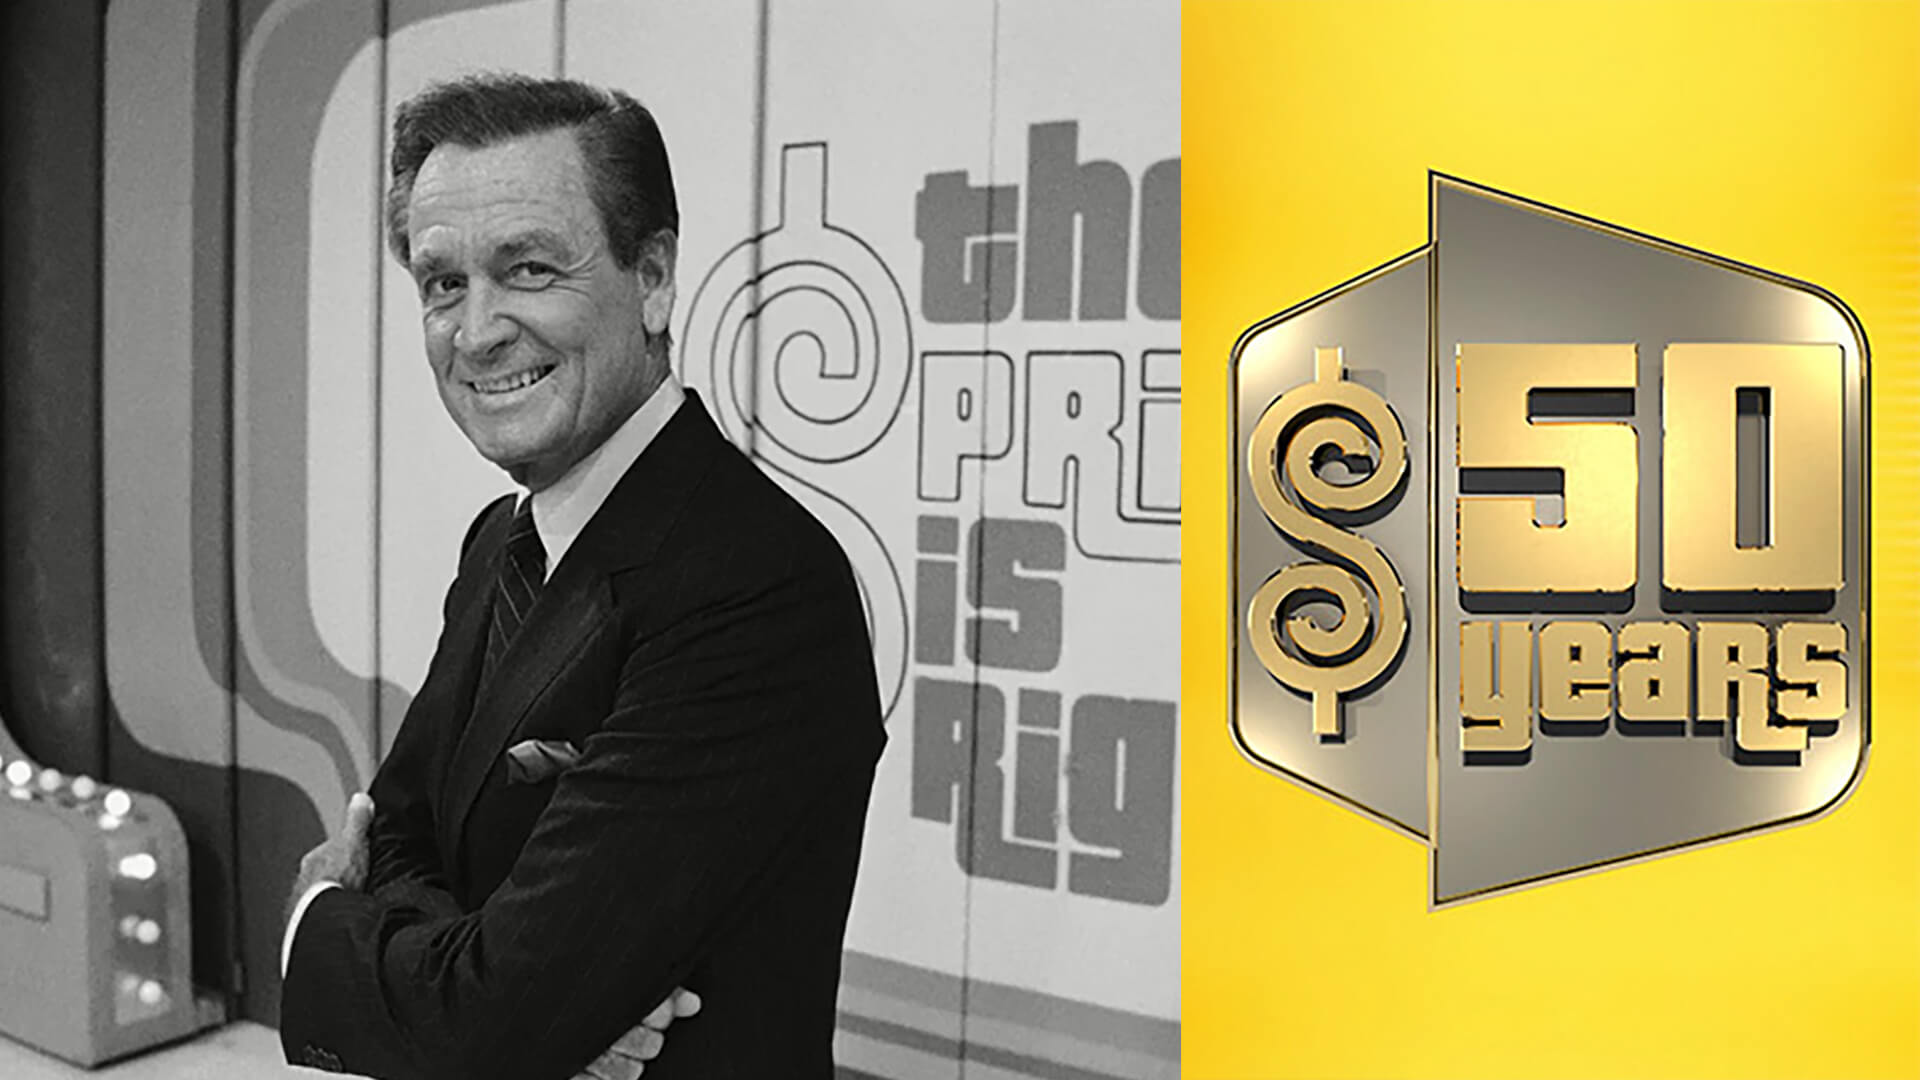 The Price is Right and Bob Barker for the 50th anniversary